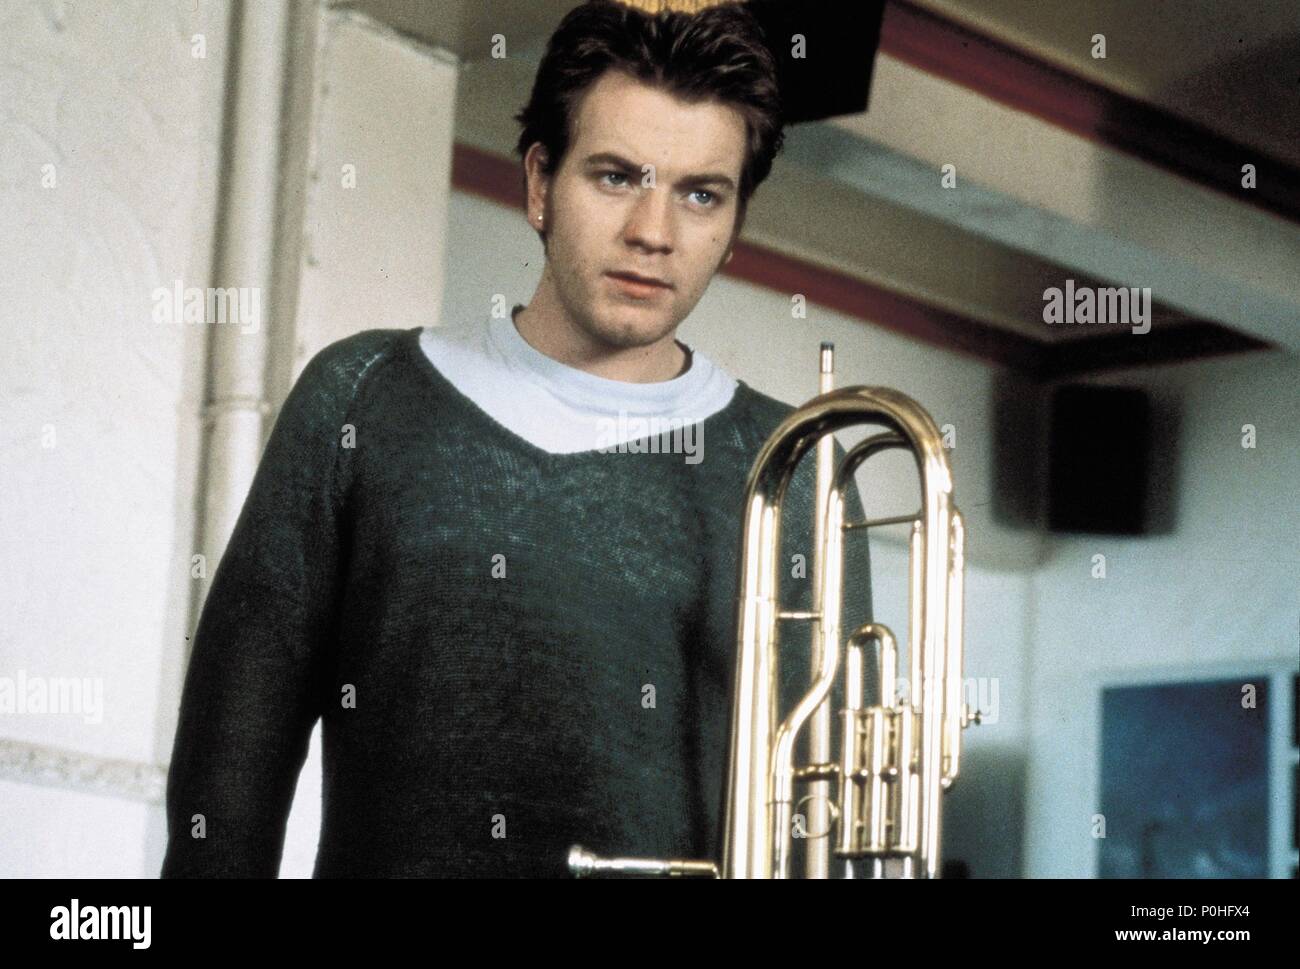 Original Film Title: BRASSED OFF.  English Title: BRASSED OFF.  Film Director: MARK HERMAN.  Year: 1996.  Stars: EWAN MCGREGOR. Copyright: Editorial inside use only. This is a publicly distributed handout. Access rights only, no license of copyright provided. Mandatory authorization to Visual Icon (www.visual-icon.com) is required for the reproduction of this image. Credit: MIRAMAX / Album Stock Photo